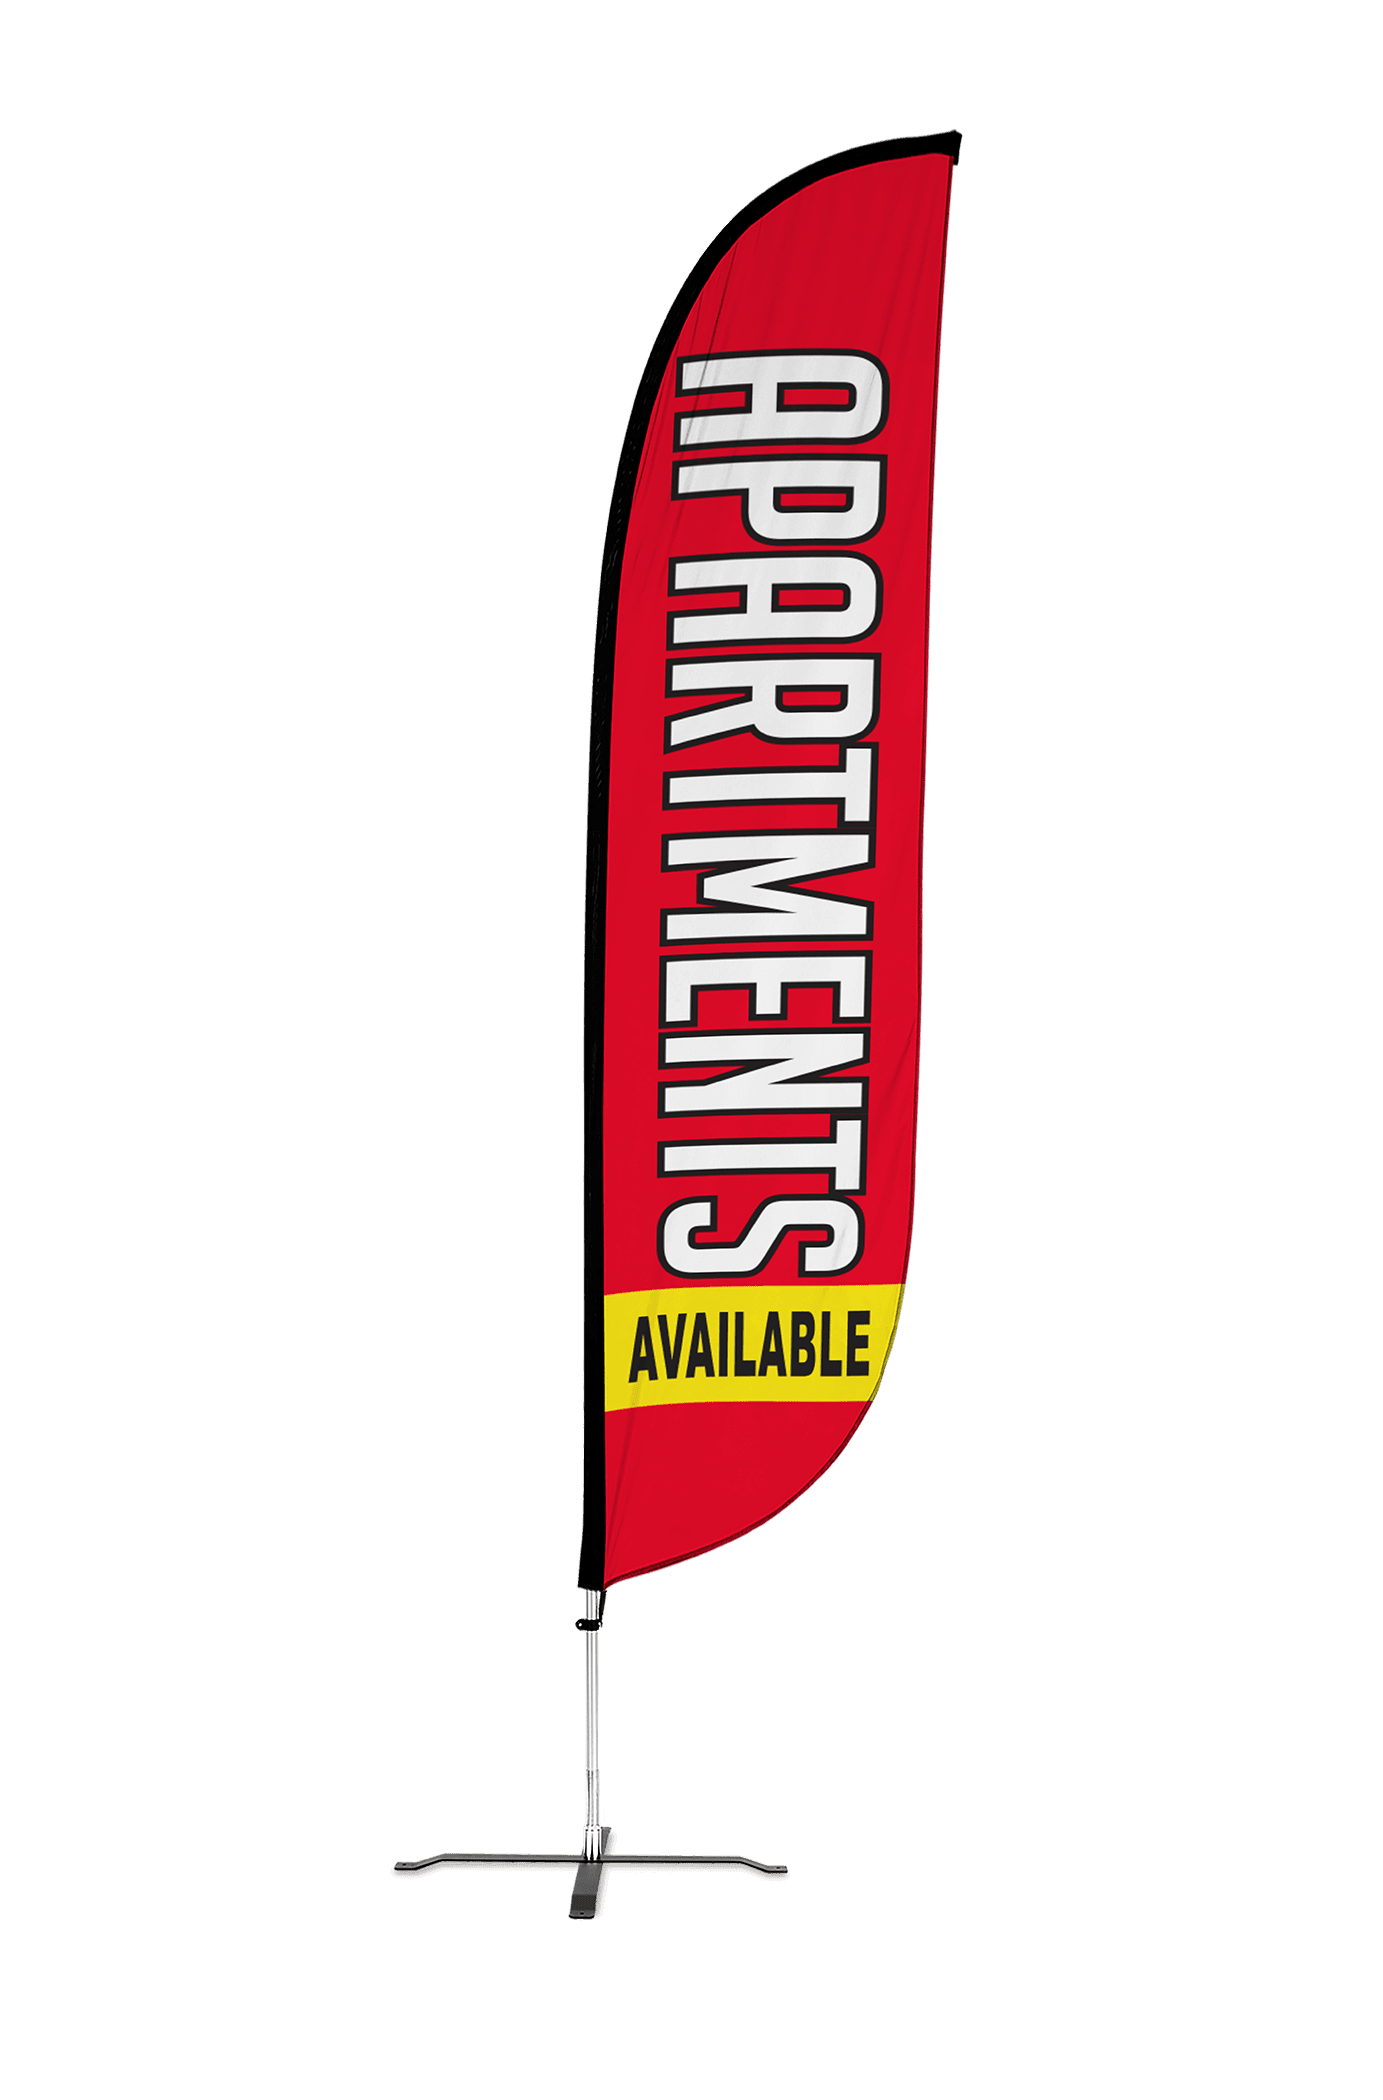 Apartments Available Feather Flag 